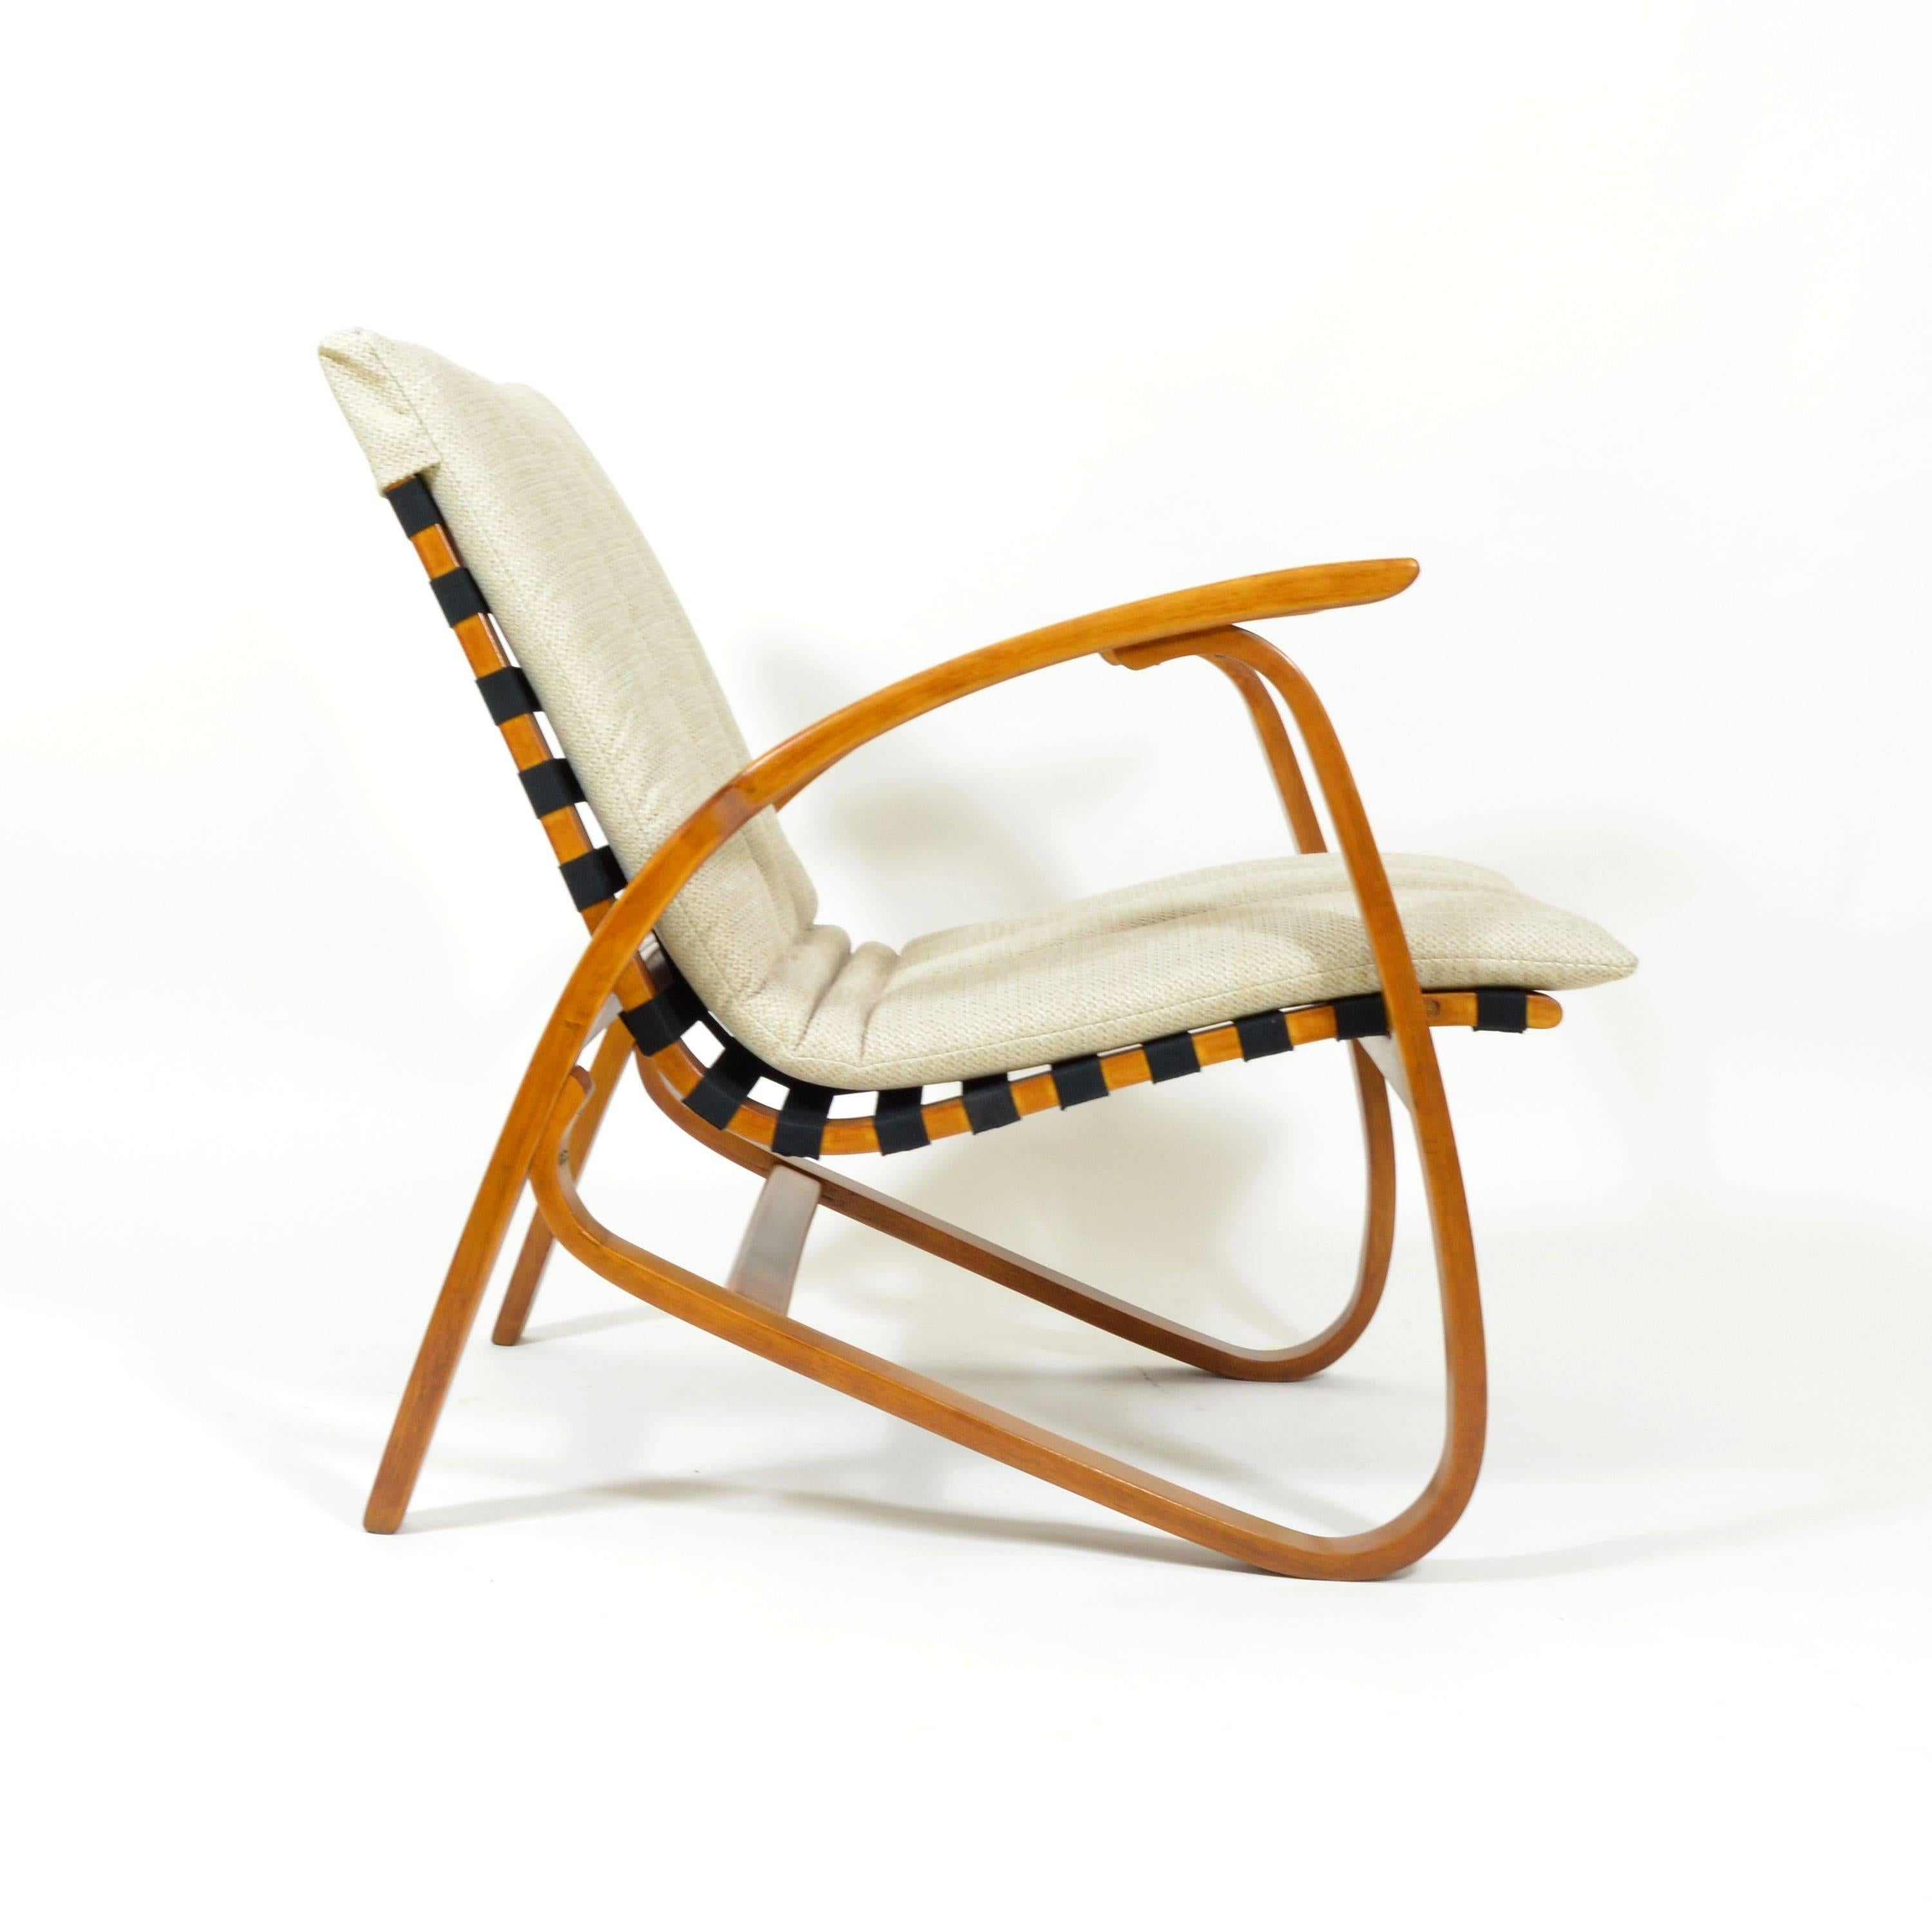 Czech Strap Armchair by Jan Vaněk, 1930s In Good Condition For Sale In Zbiroh, CZ